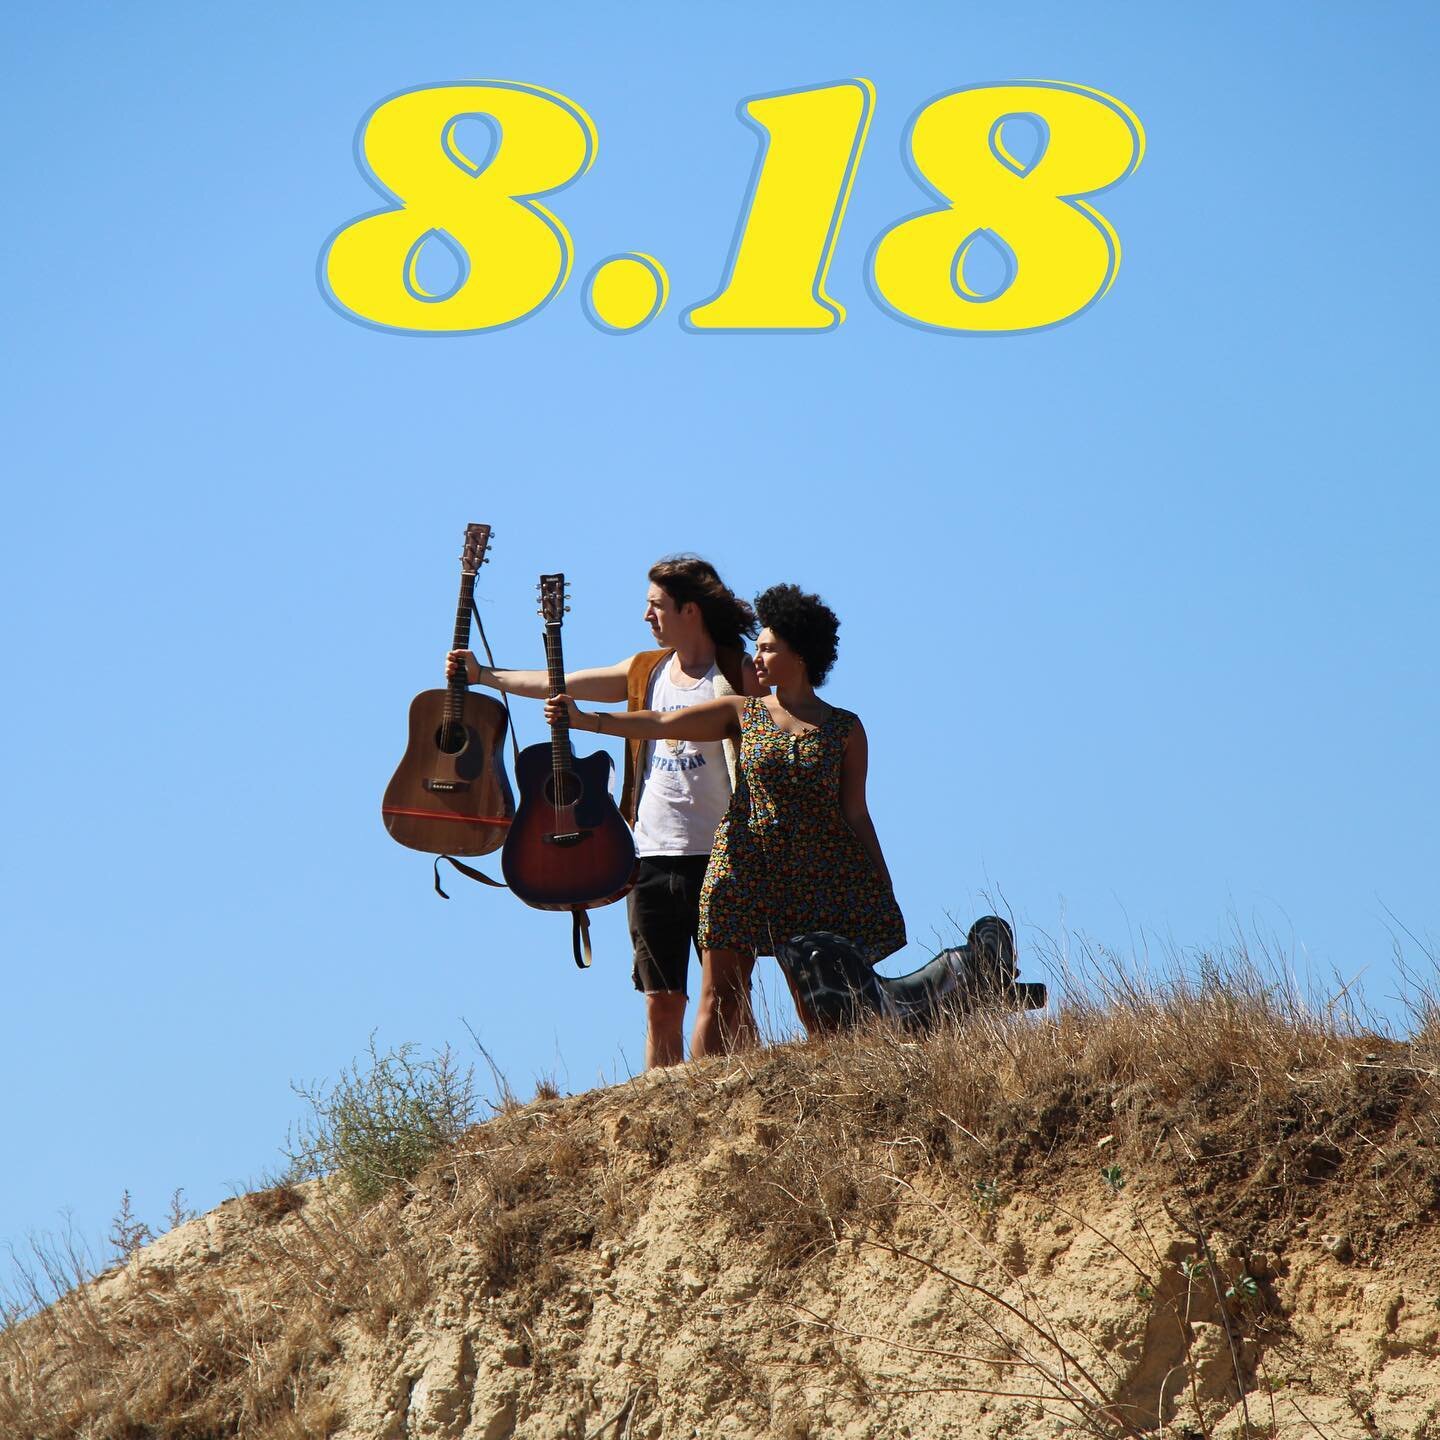 (818) is where we call home ☎️ 8.18 is when we come home 👩🏽&zwj;🤝&zwj;👨🏻 we are Valley kids and our first album will be available everywhere August 18, 2022 💿❤️

📸: @summerbreeze.art